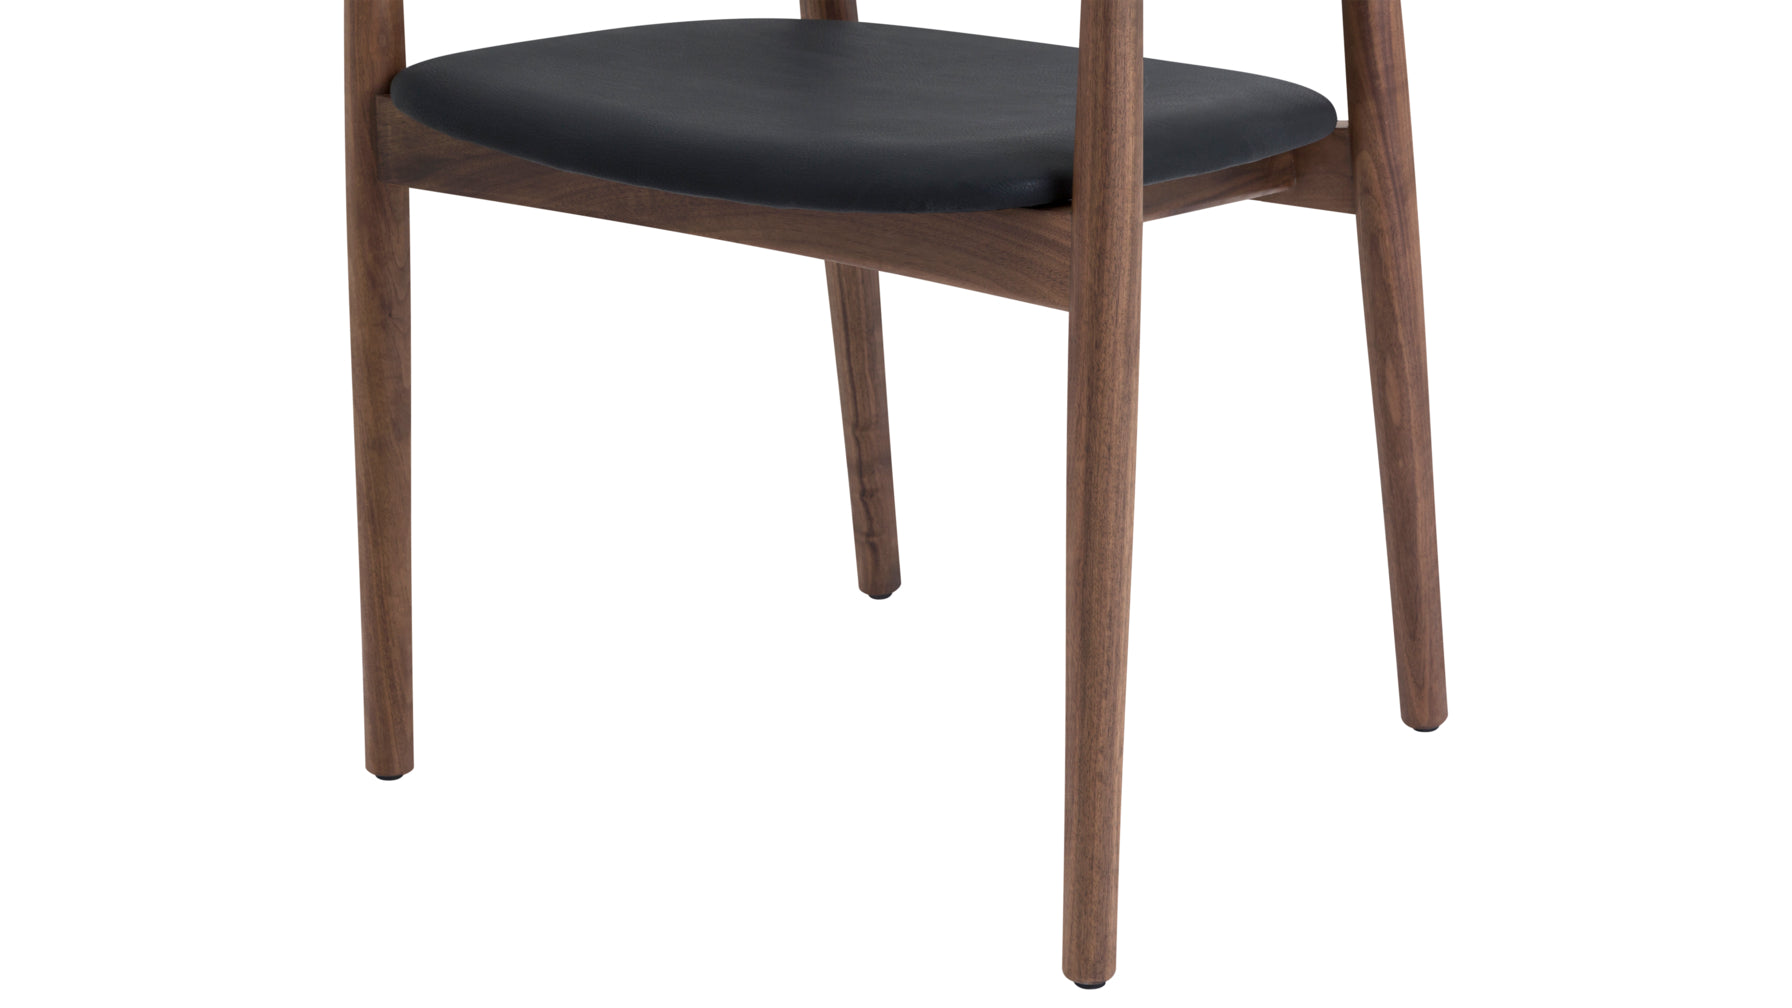 Count On Me Dining Chair, Walnut Black - Image 6